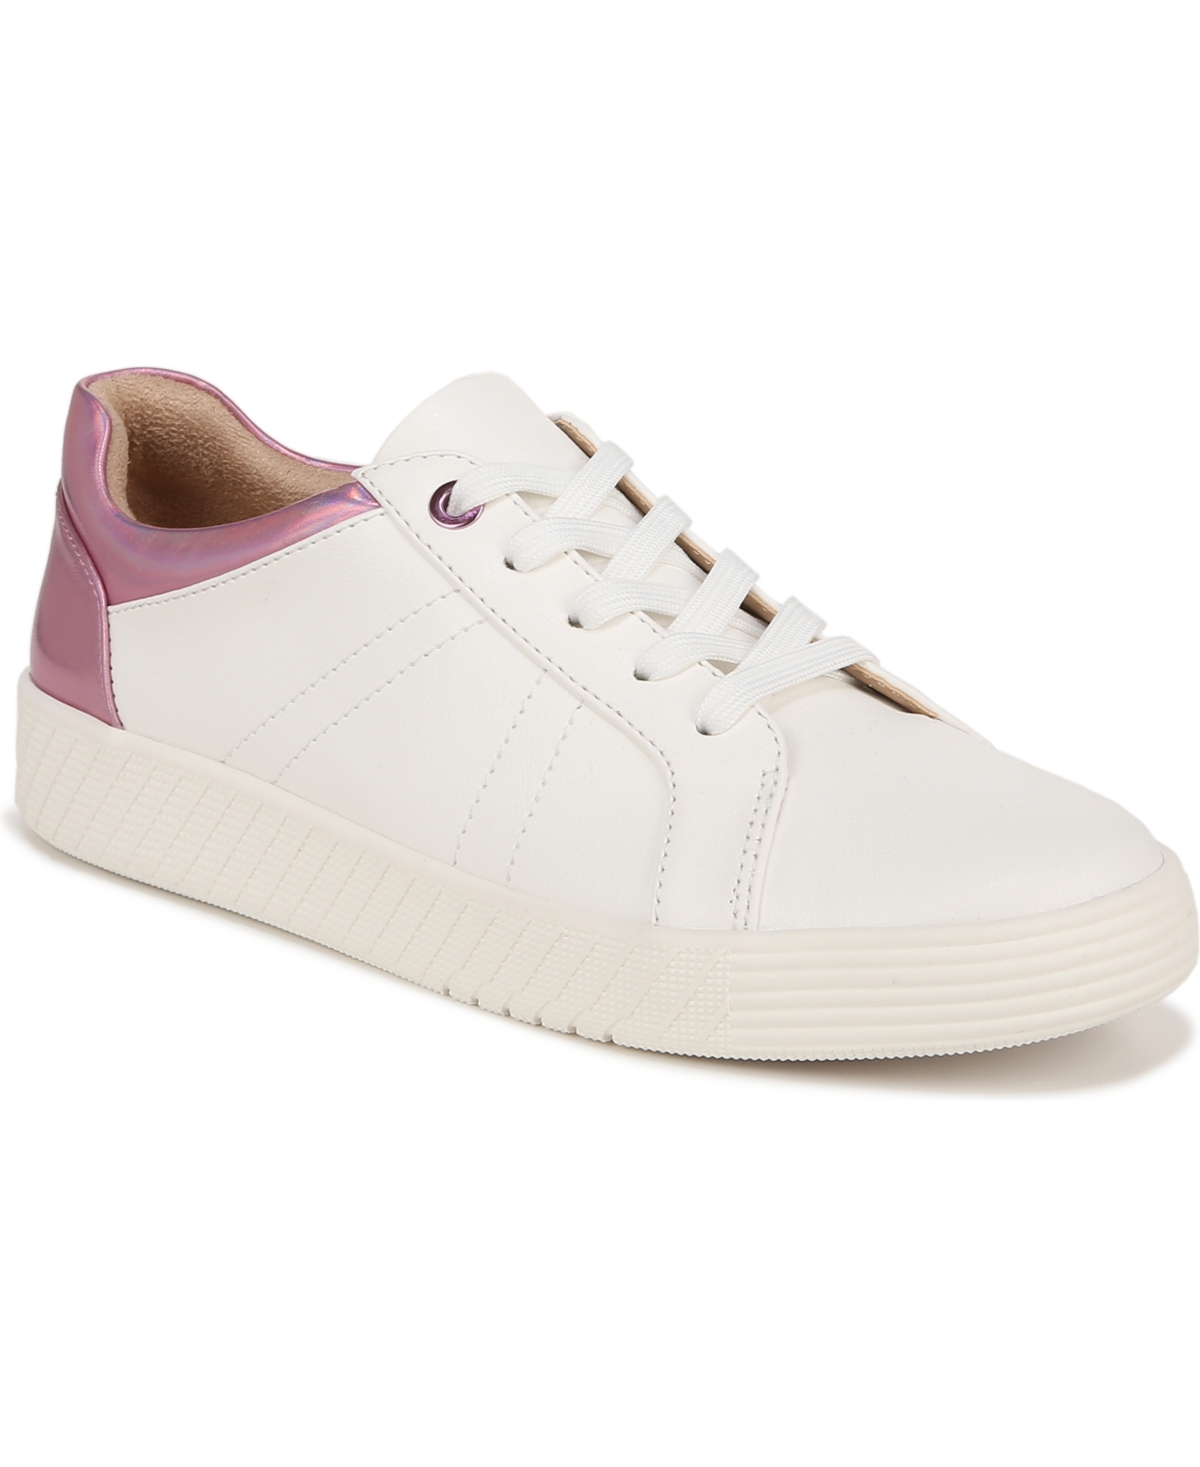 Neela Sneakers - White/Gum Faux Leather